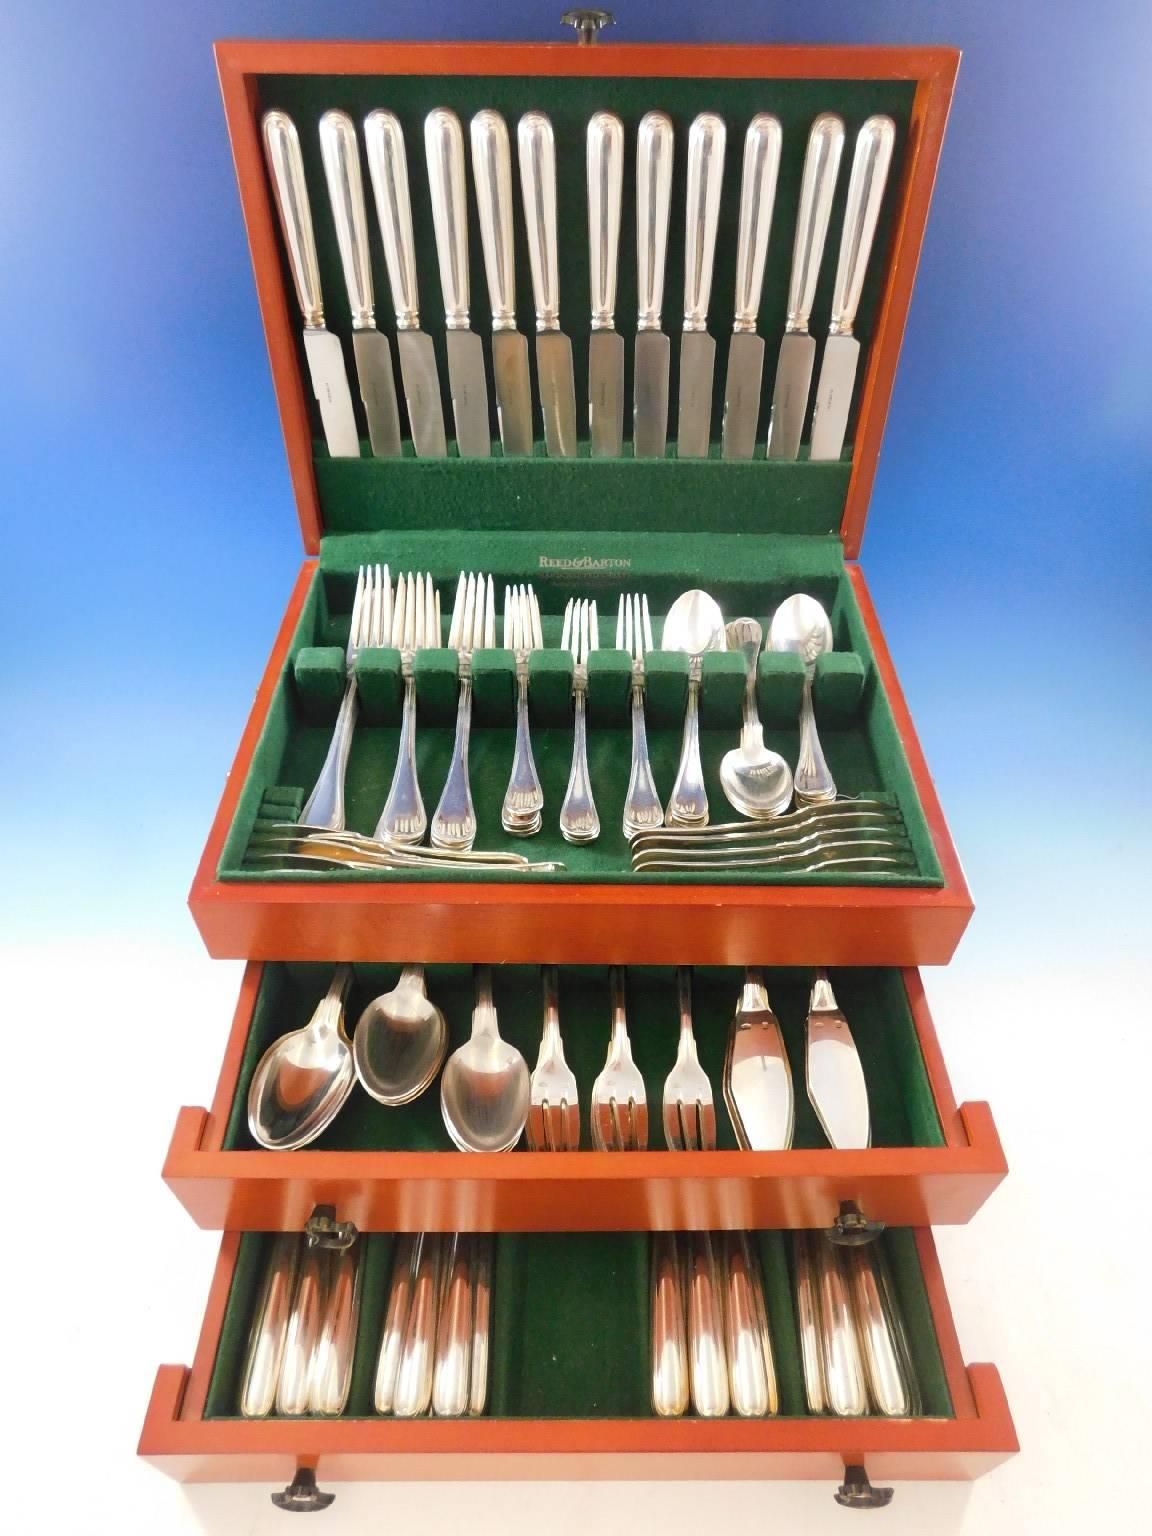 The Parisian silversmith Puiforcat is regarded as one of the legendary names in European silver craftsmanship. Inspired by cutlery designed by silversmith Franasois-Thomas Germain in the 18th century and revived by Martin-Guillaume Biennais a